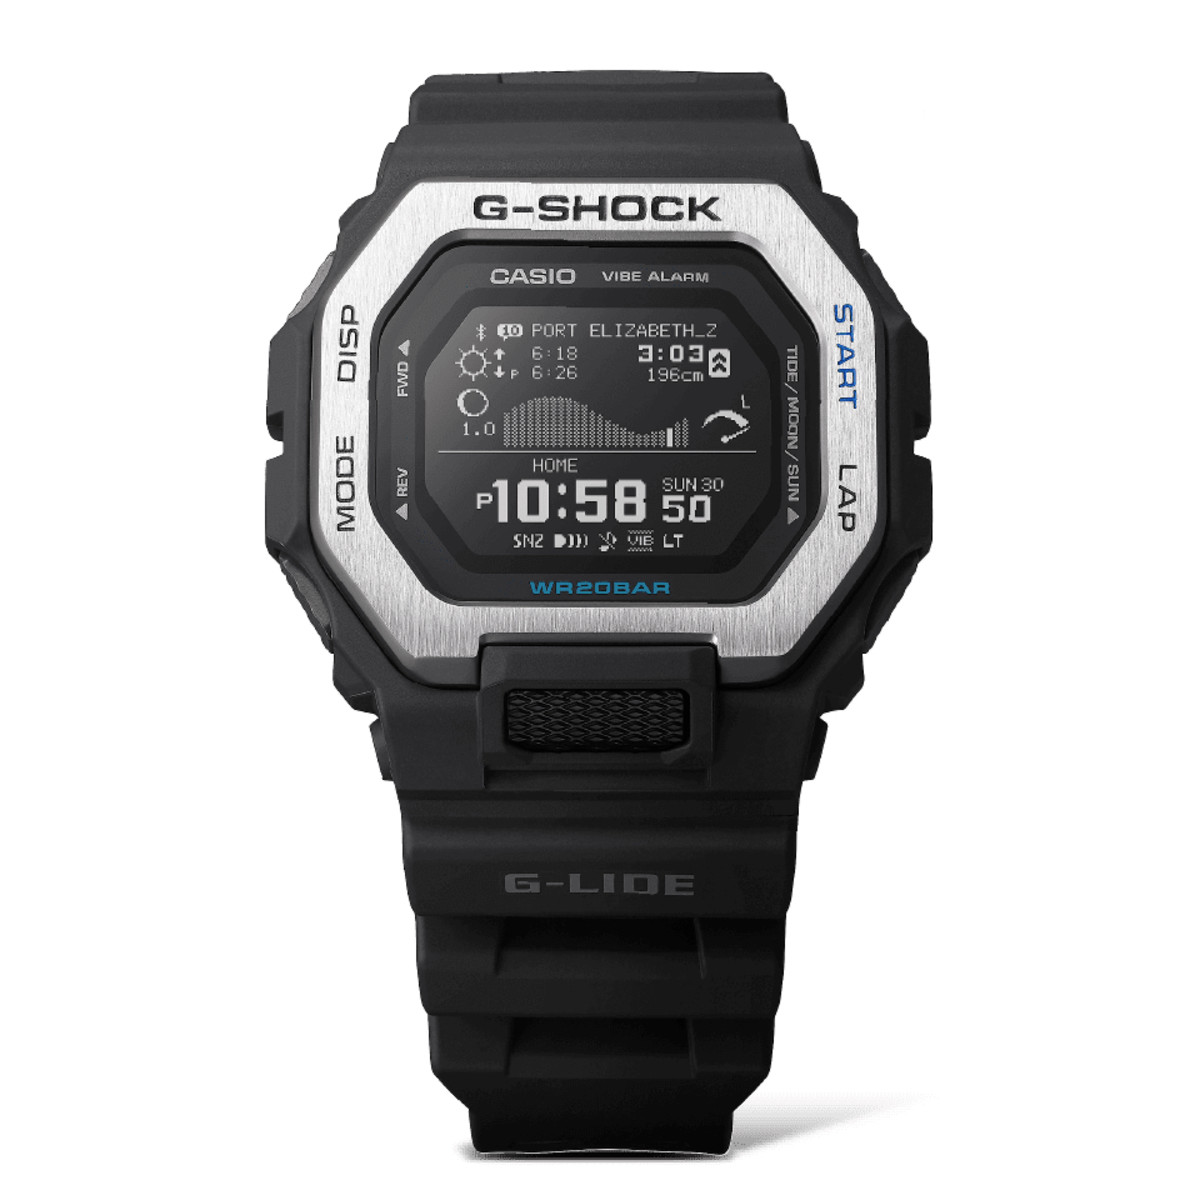 Casio S New G Shock G Lide Gbx 100 Brings Bluetooth To The Surf Watch Acquire